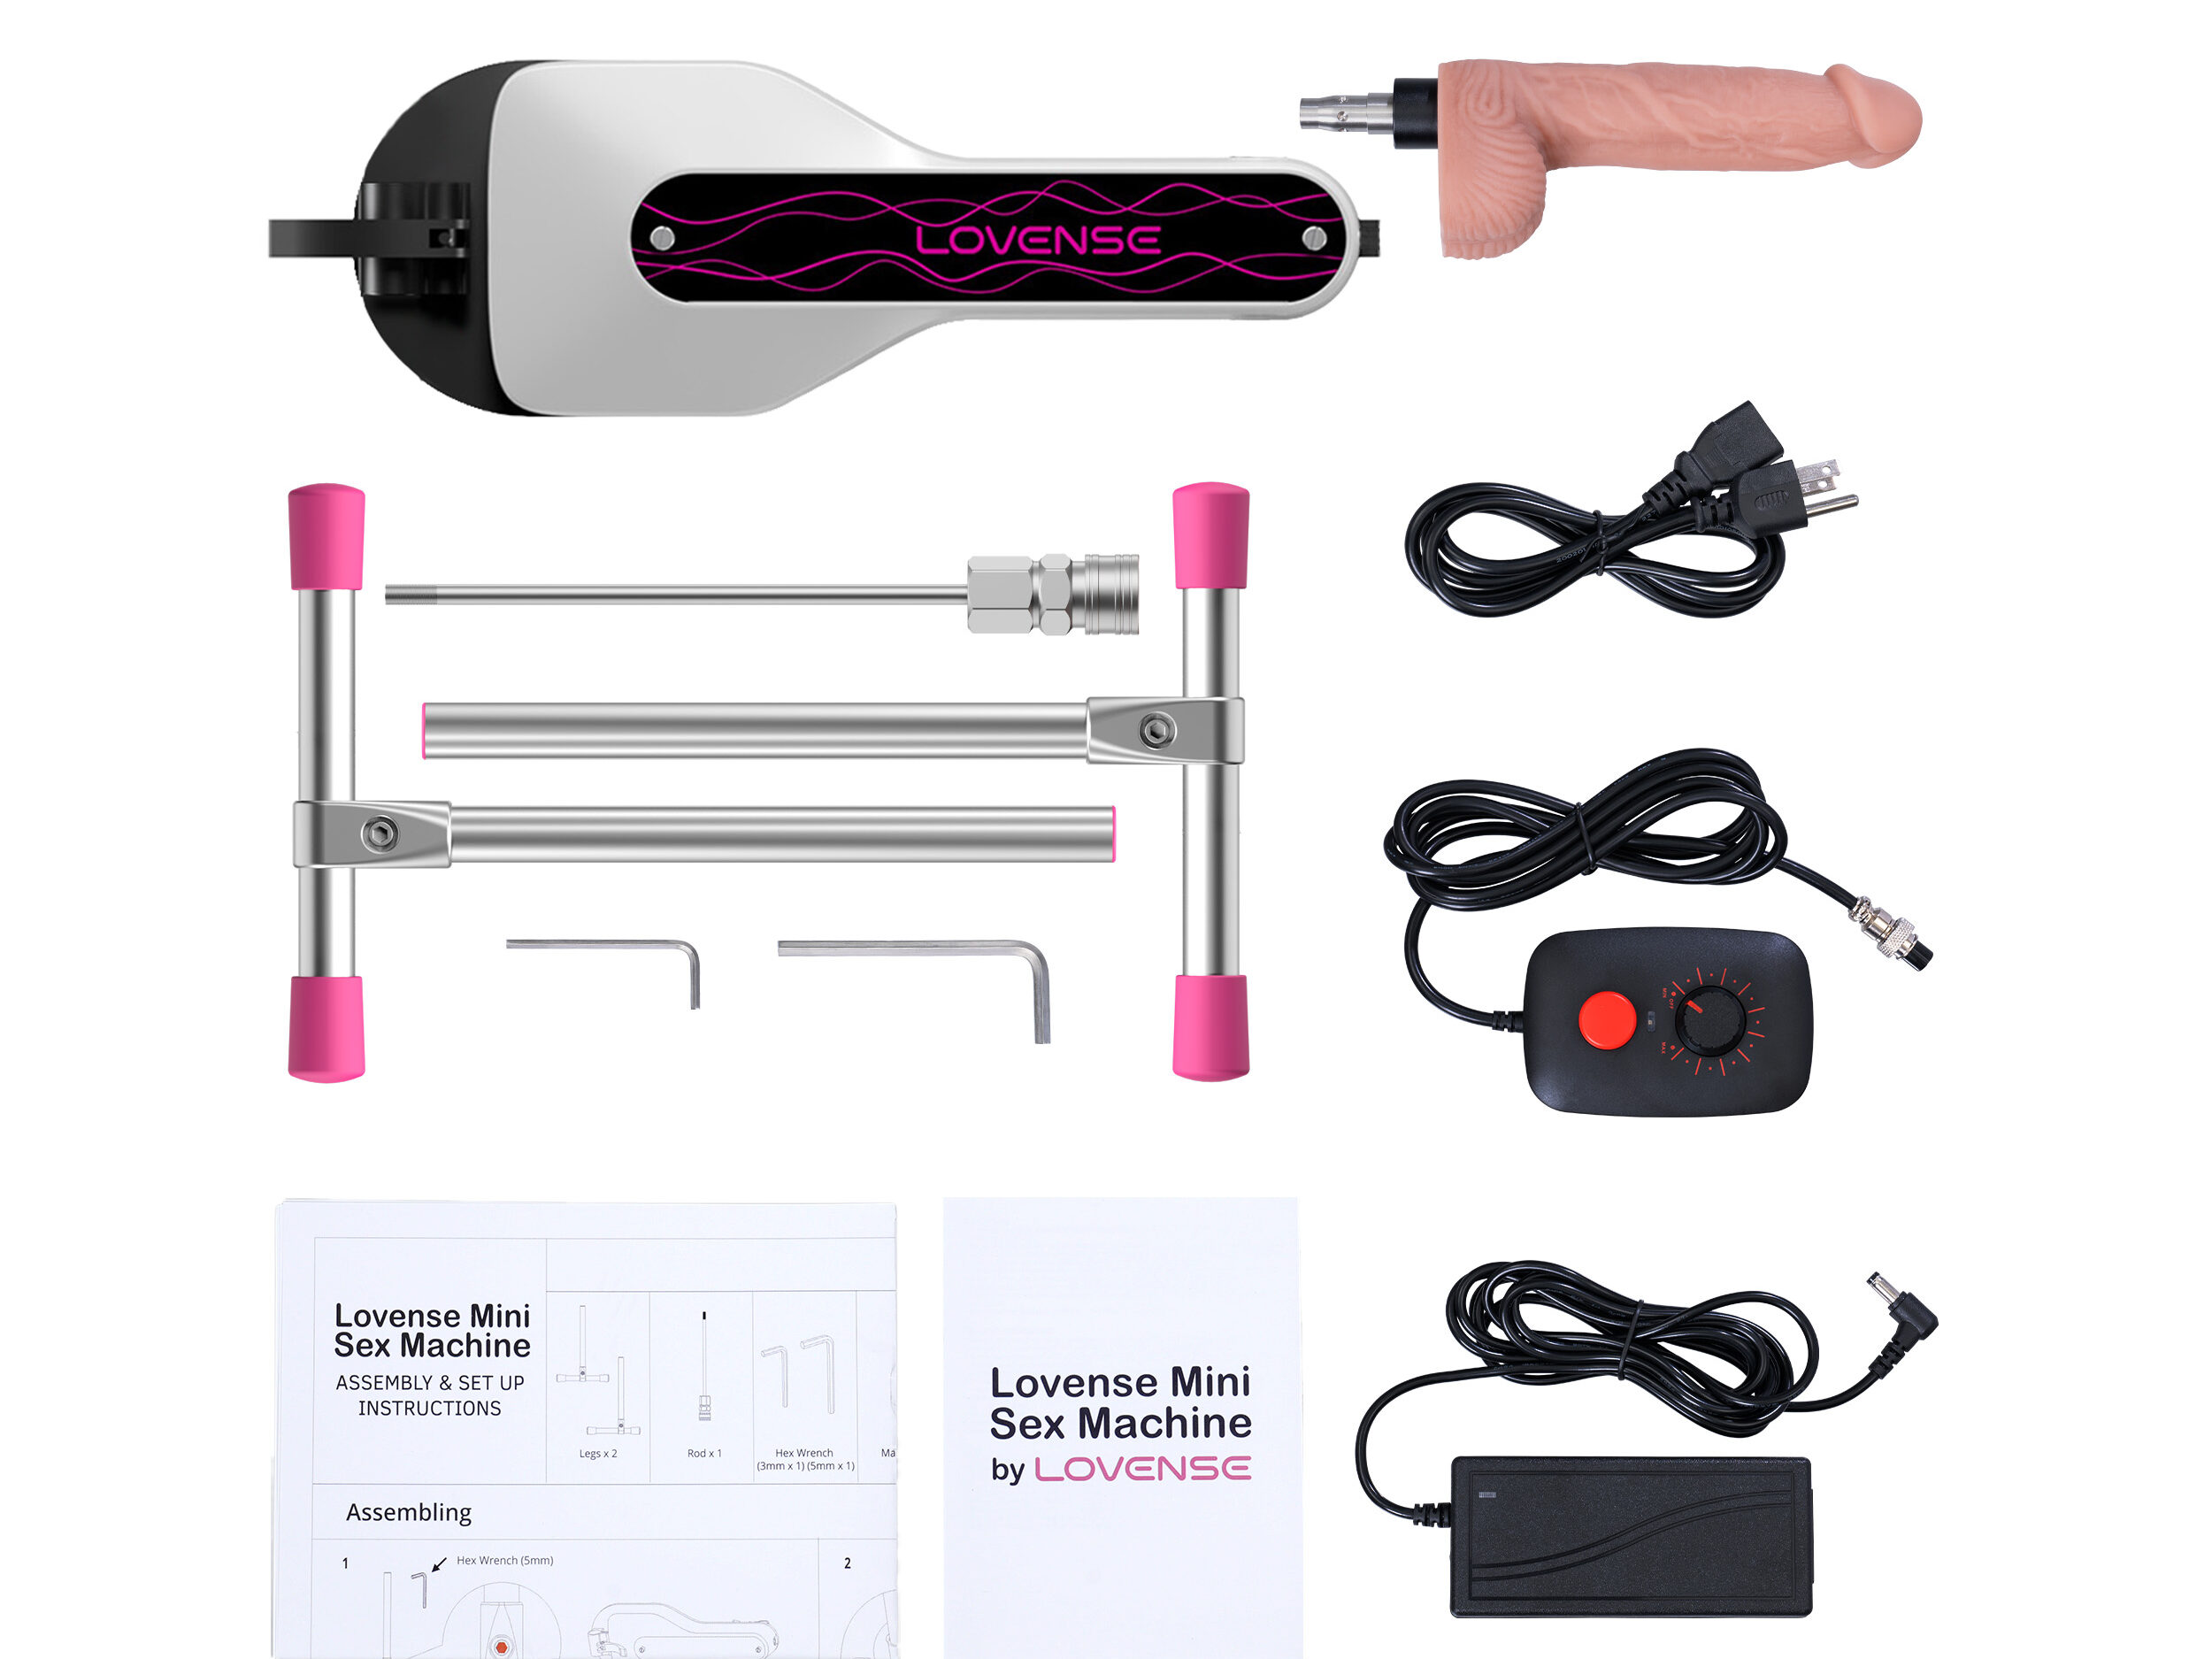 Lovense mini sex machine what's included